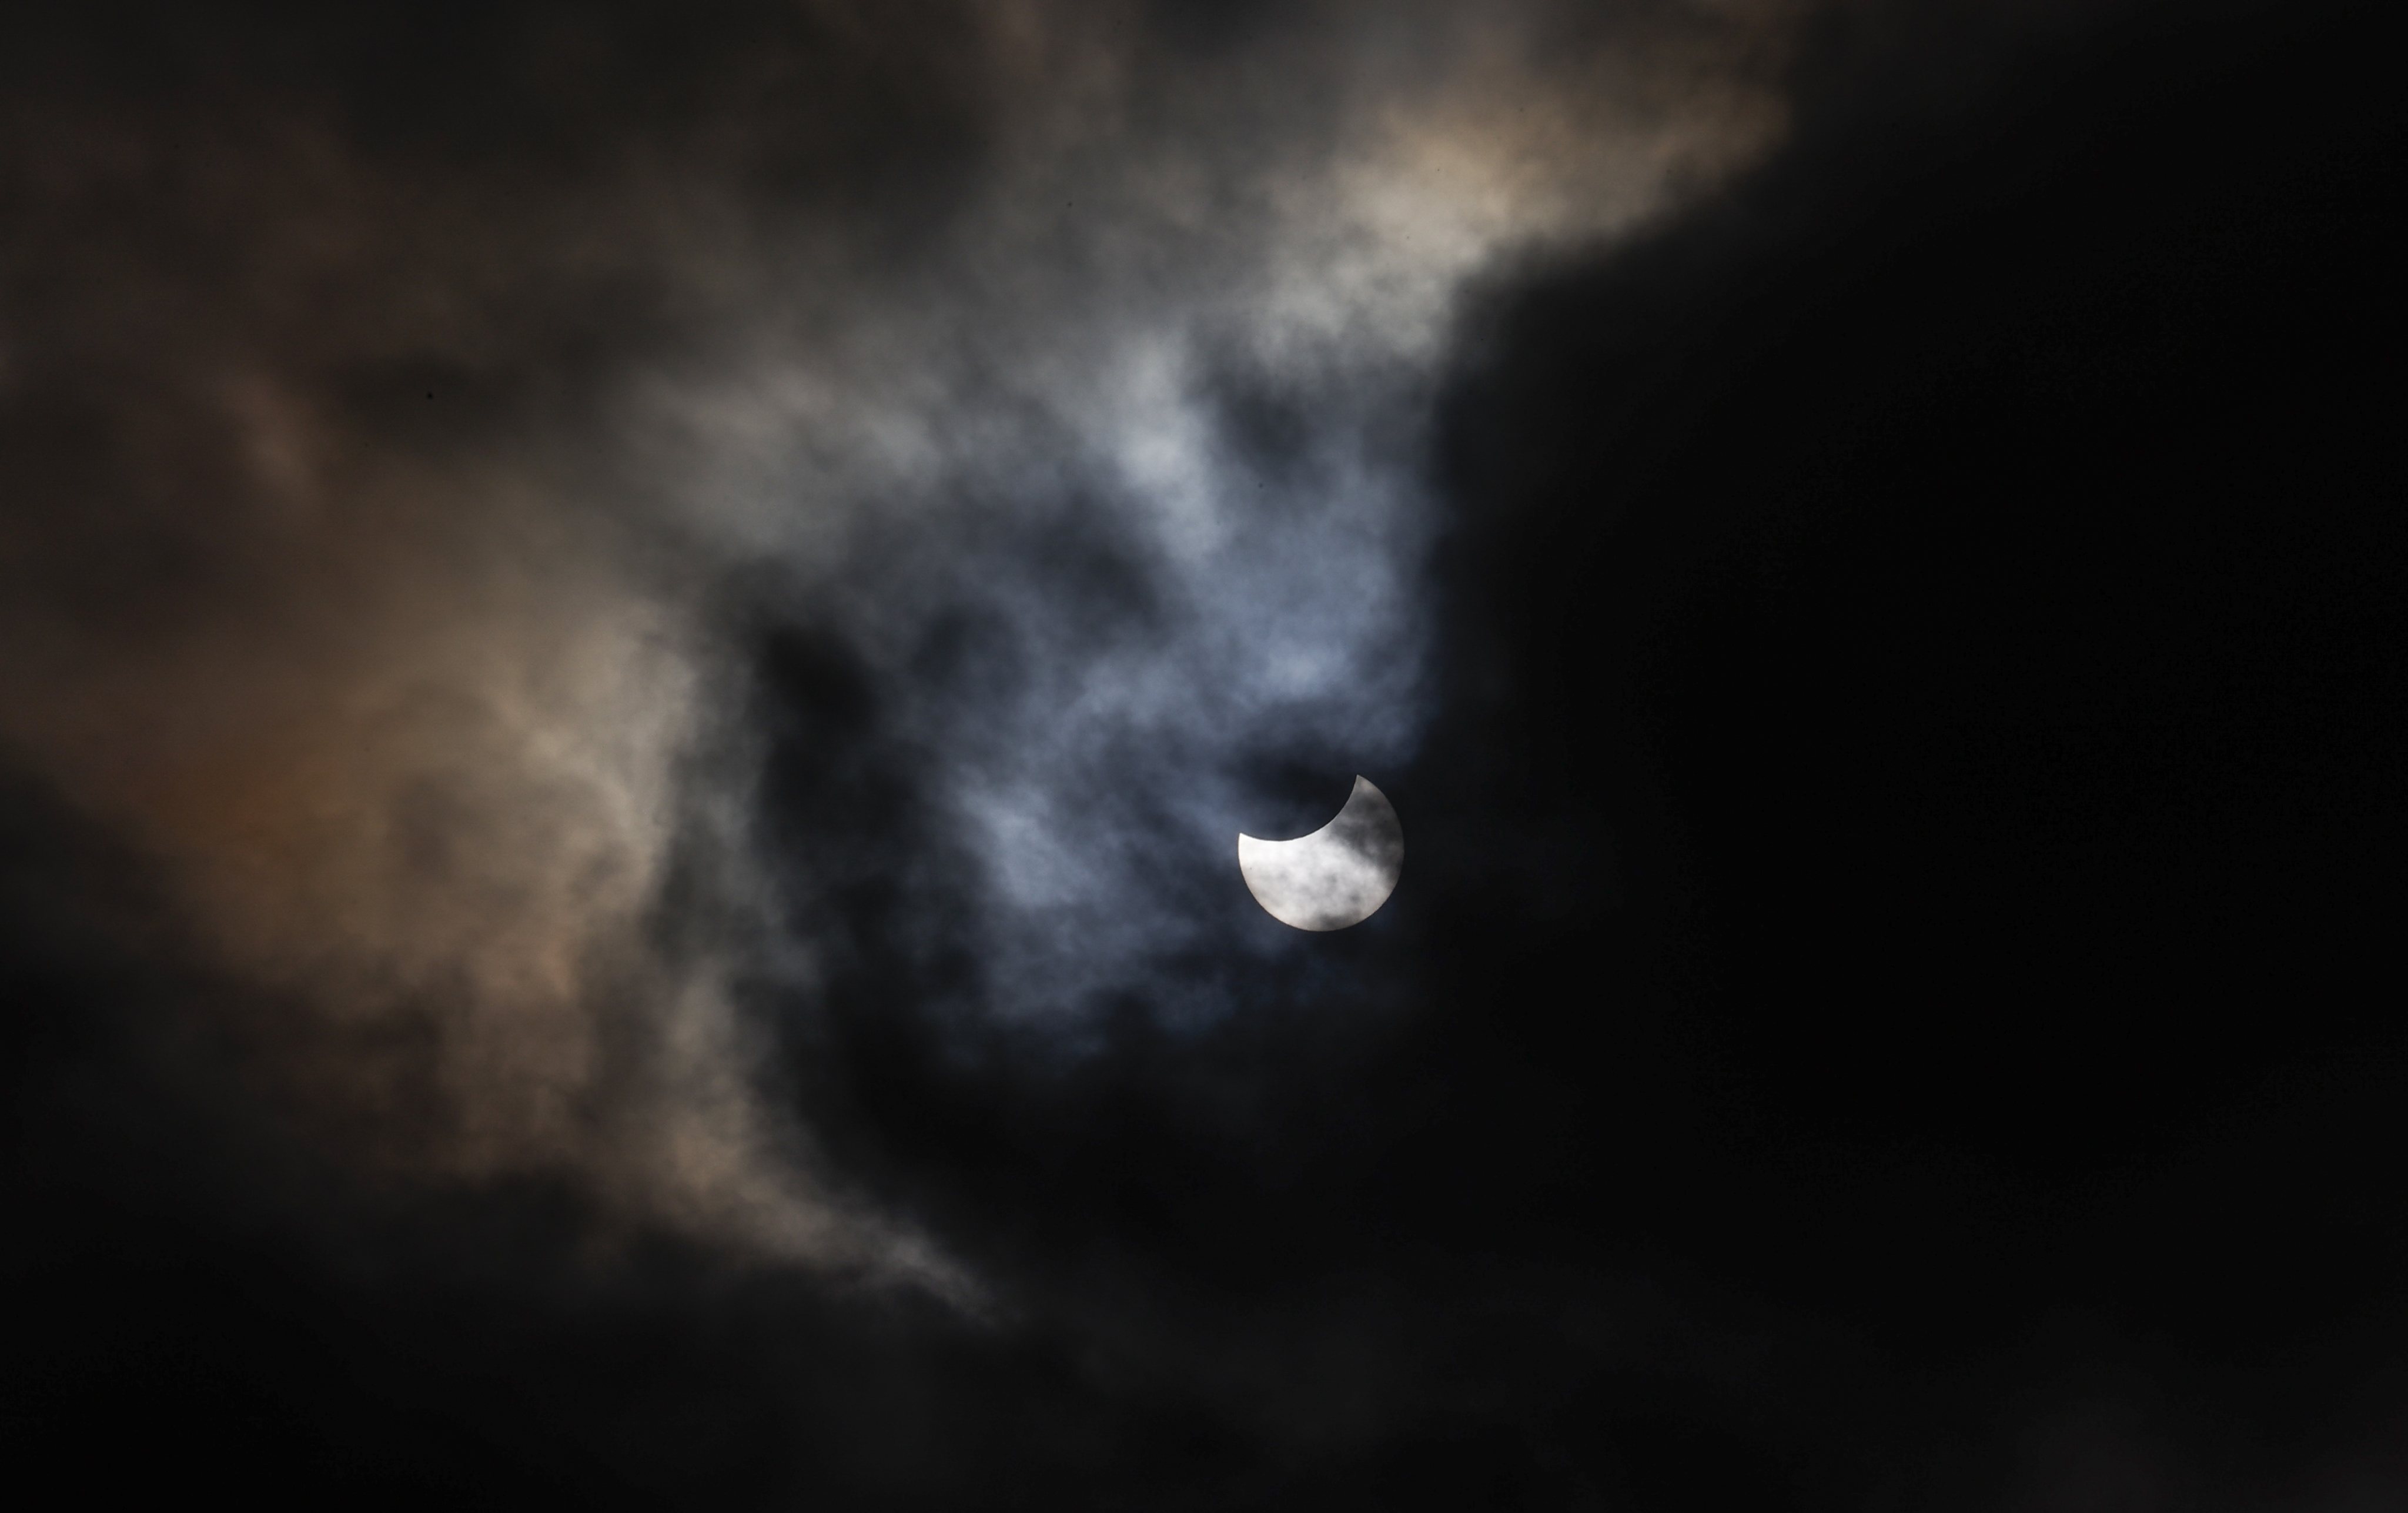 Partial solar eclipse observed in Berlin